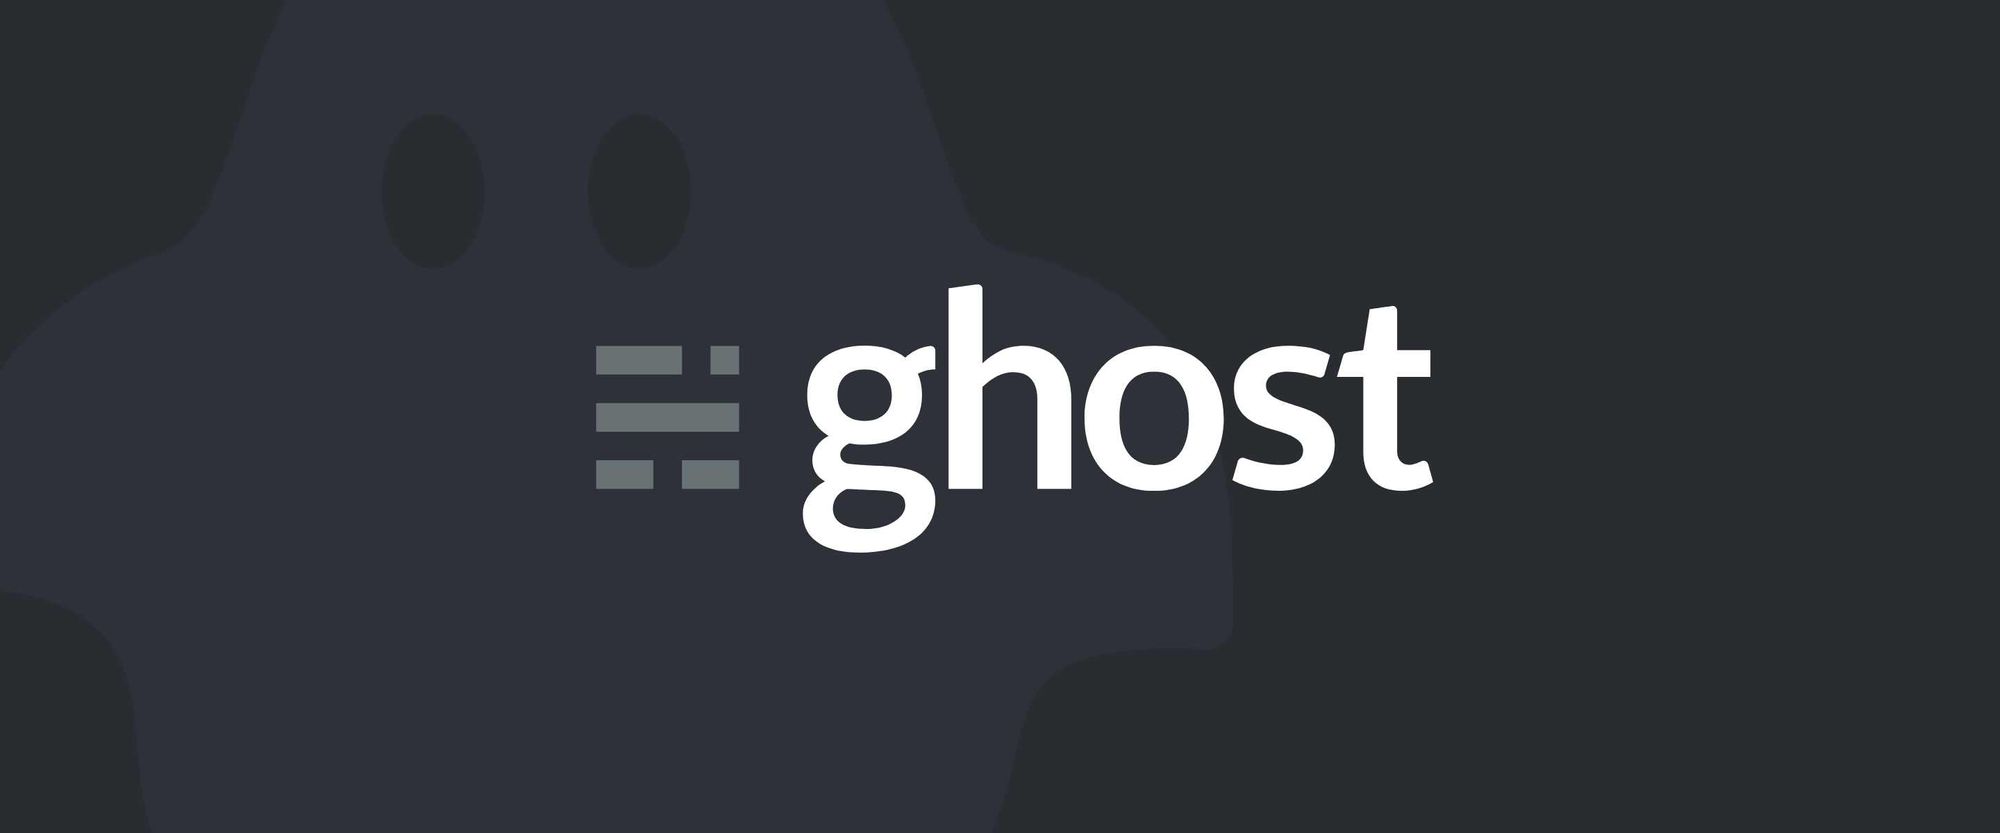 Ghost: I don't see what the hype is about